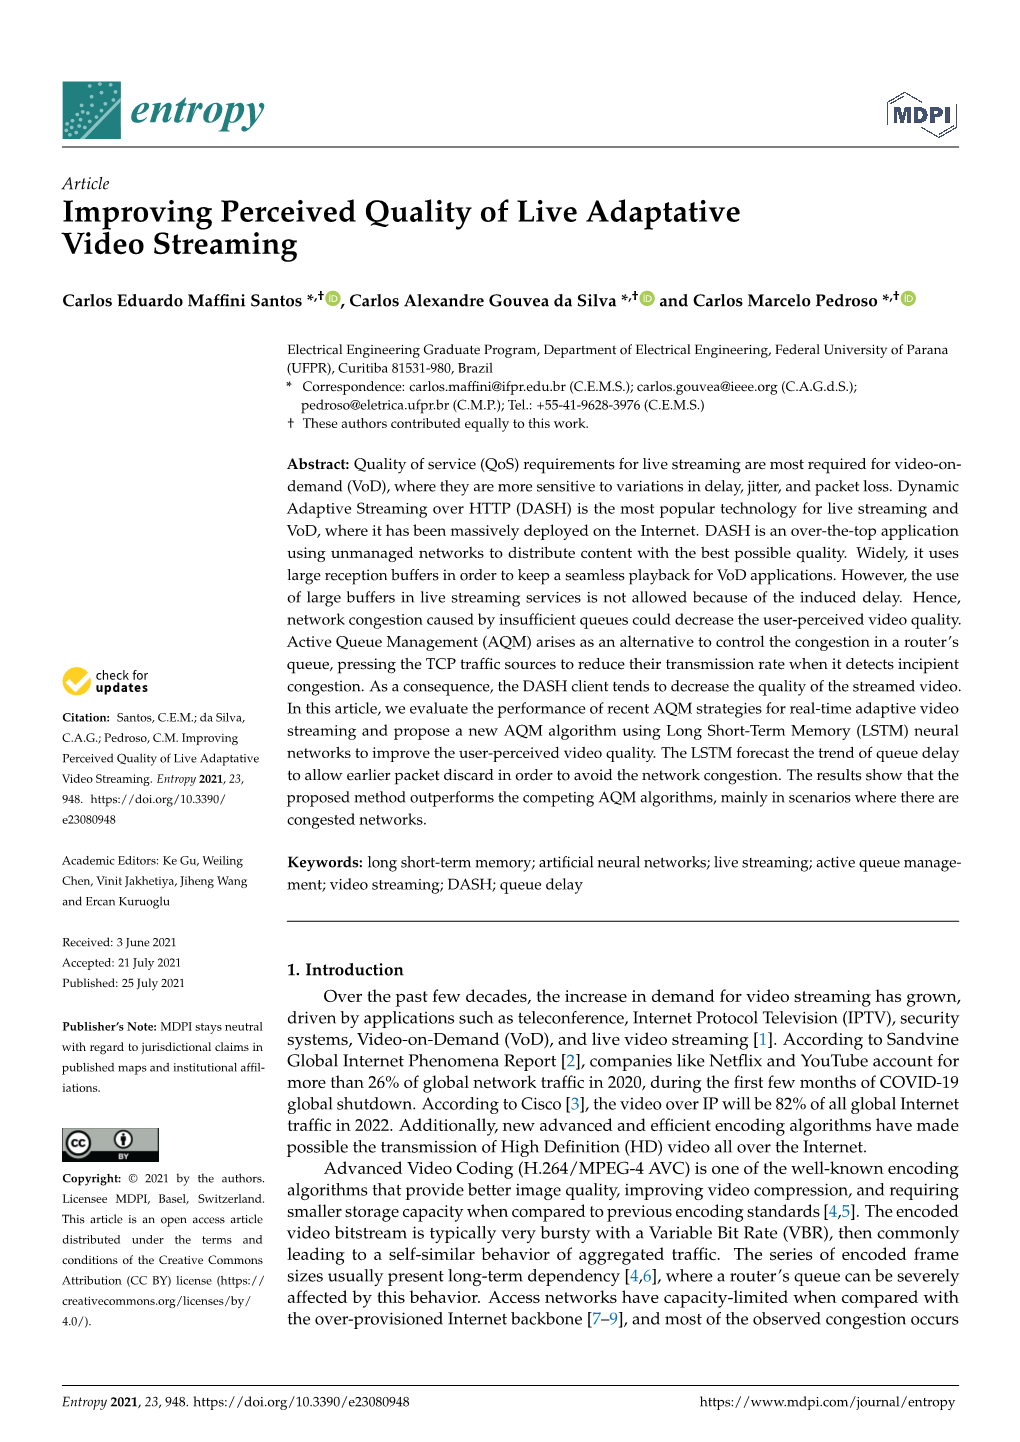 Improving Perceived Quality of Live Adaptative Video Streaming